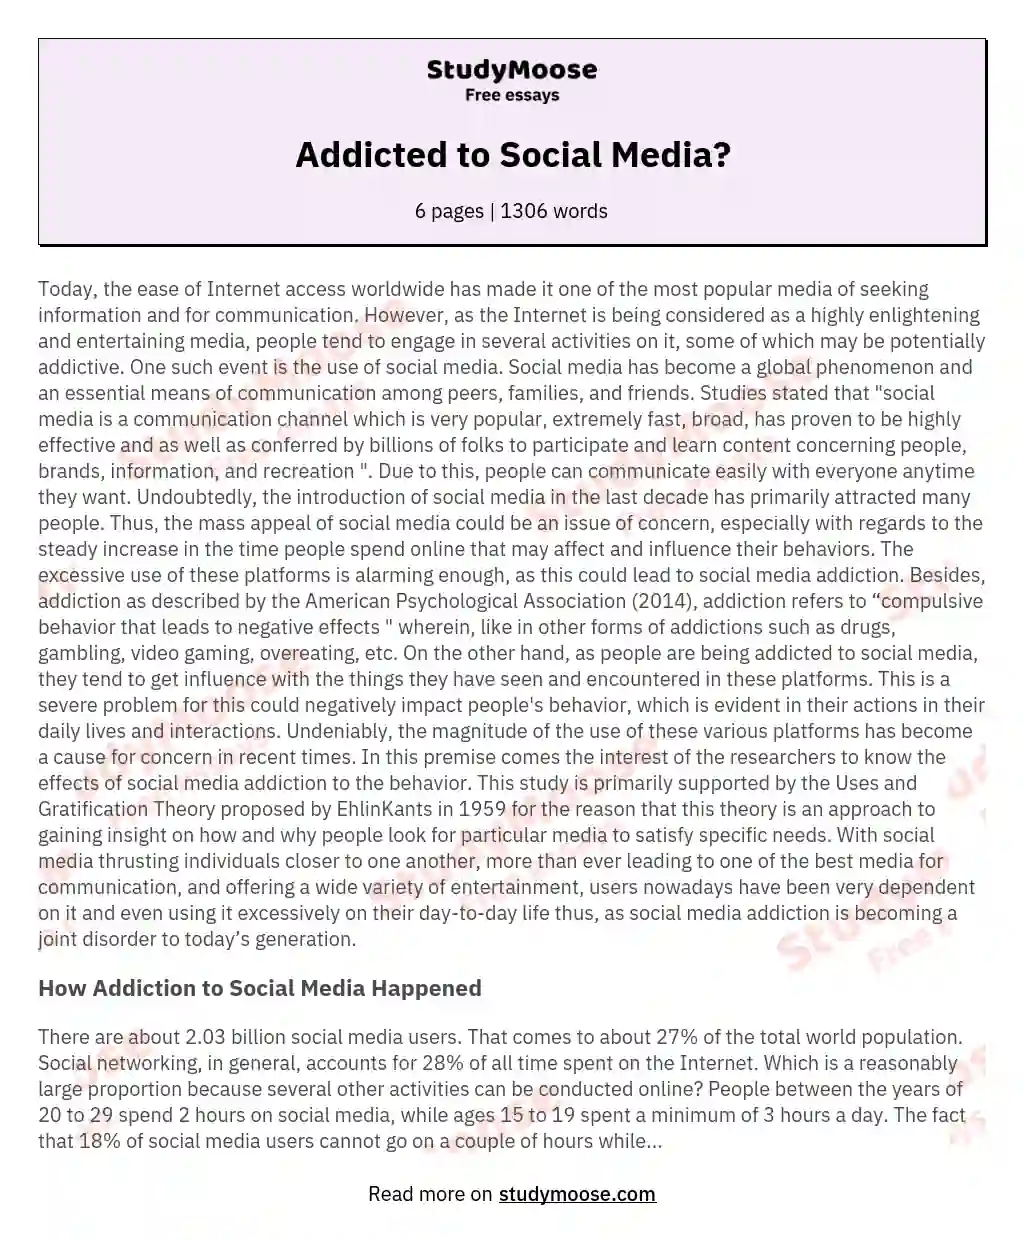 Addicted to Social Media?